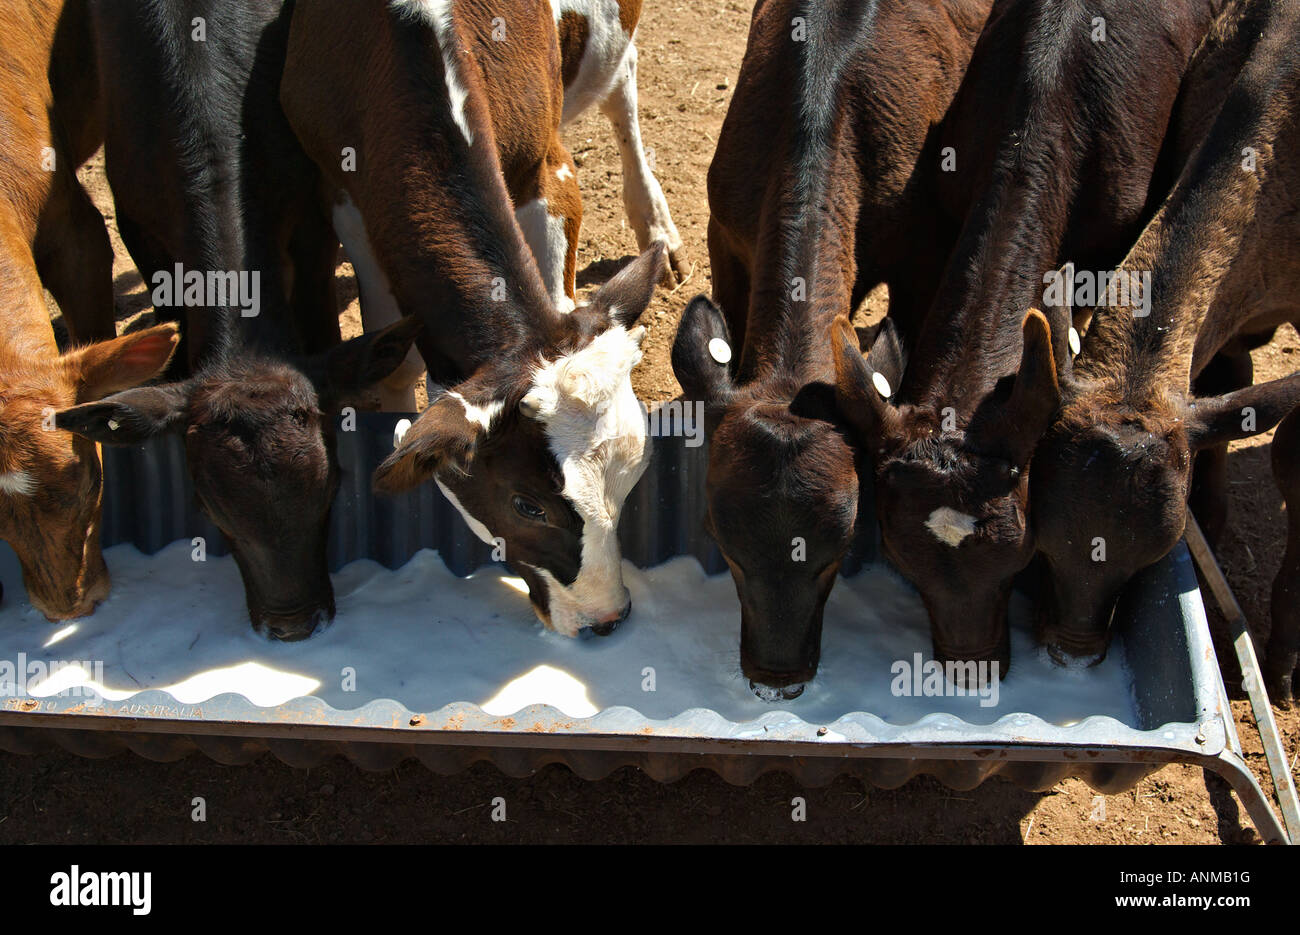 very young calves drinking milk from a trough Stock Photo